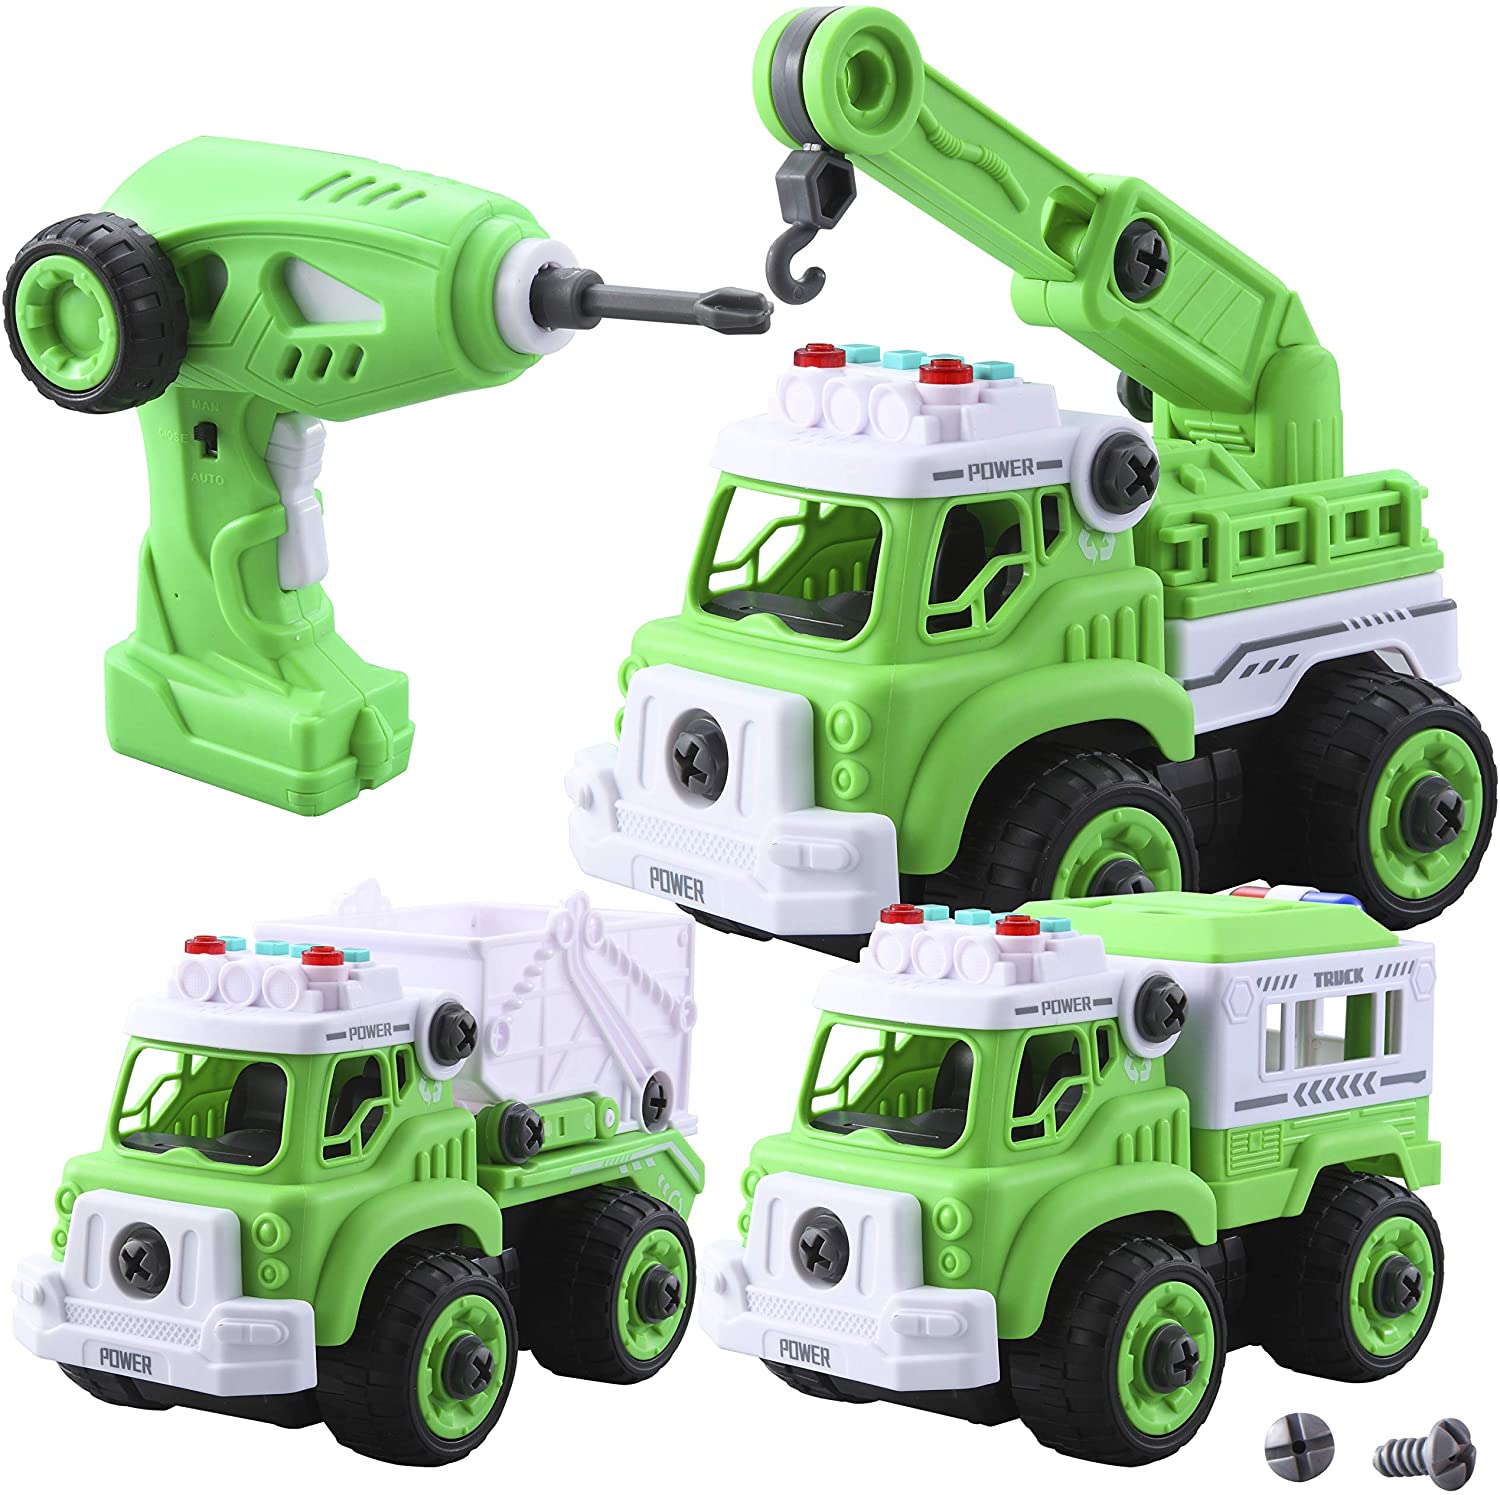 4 in 1 Take Apart RC Garbage Truck Toy and Remote Control